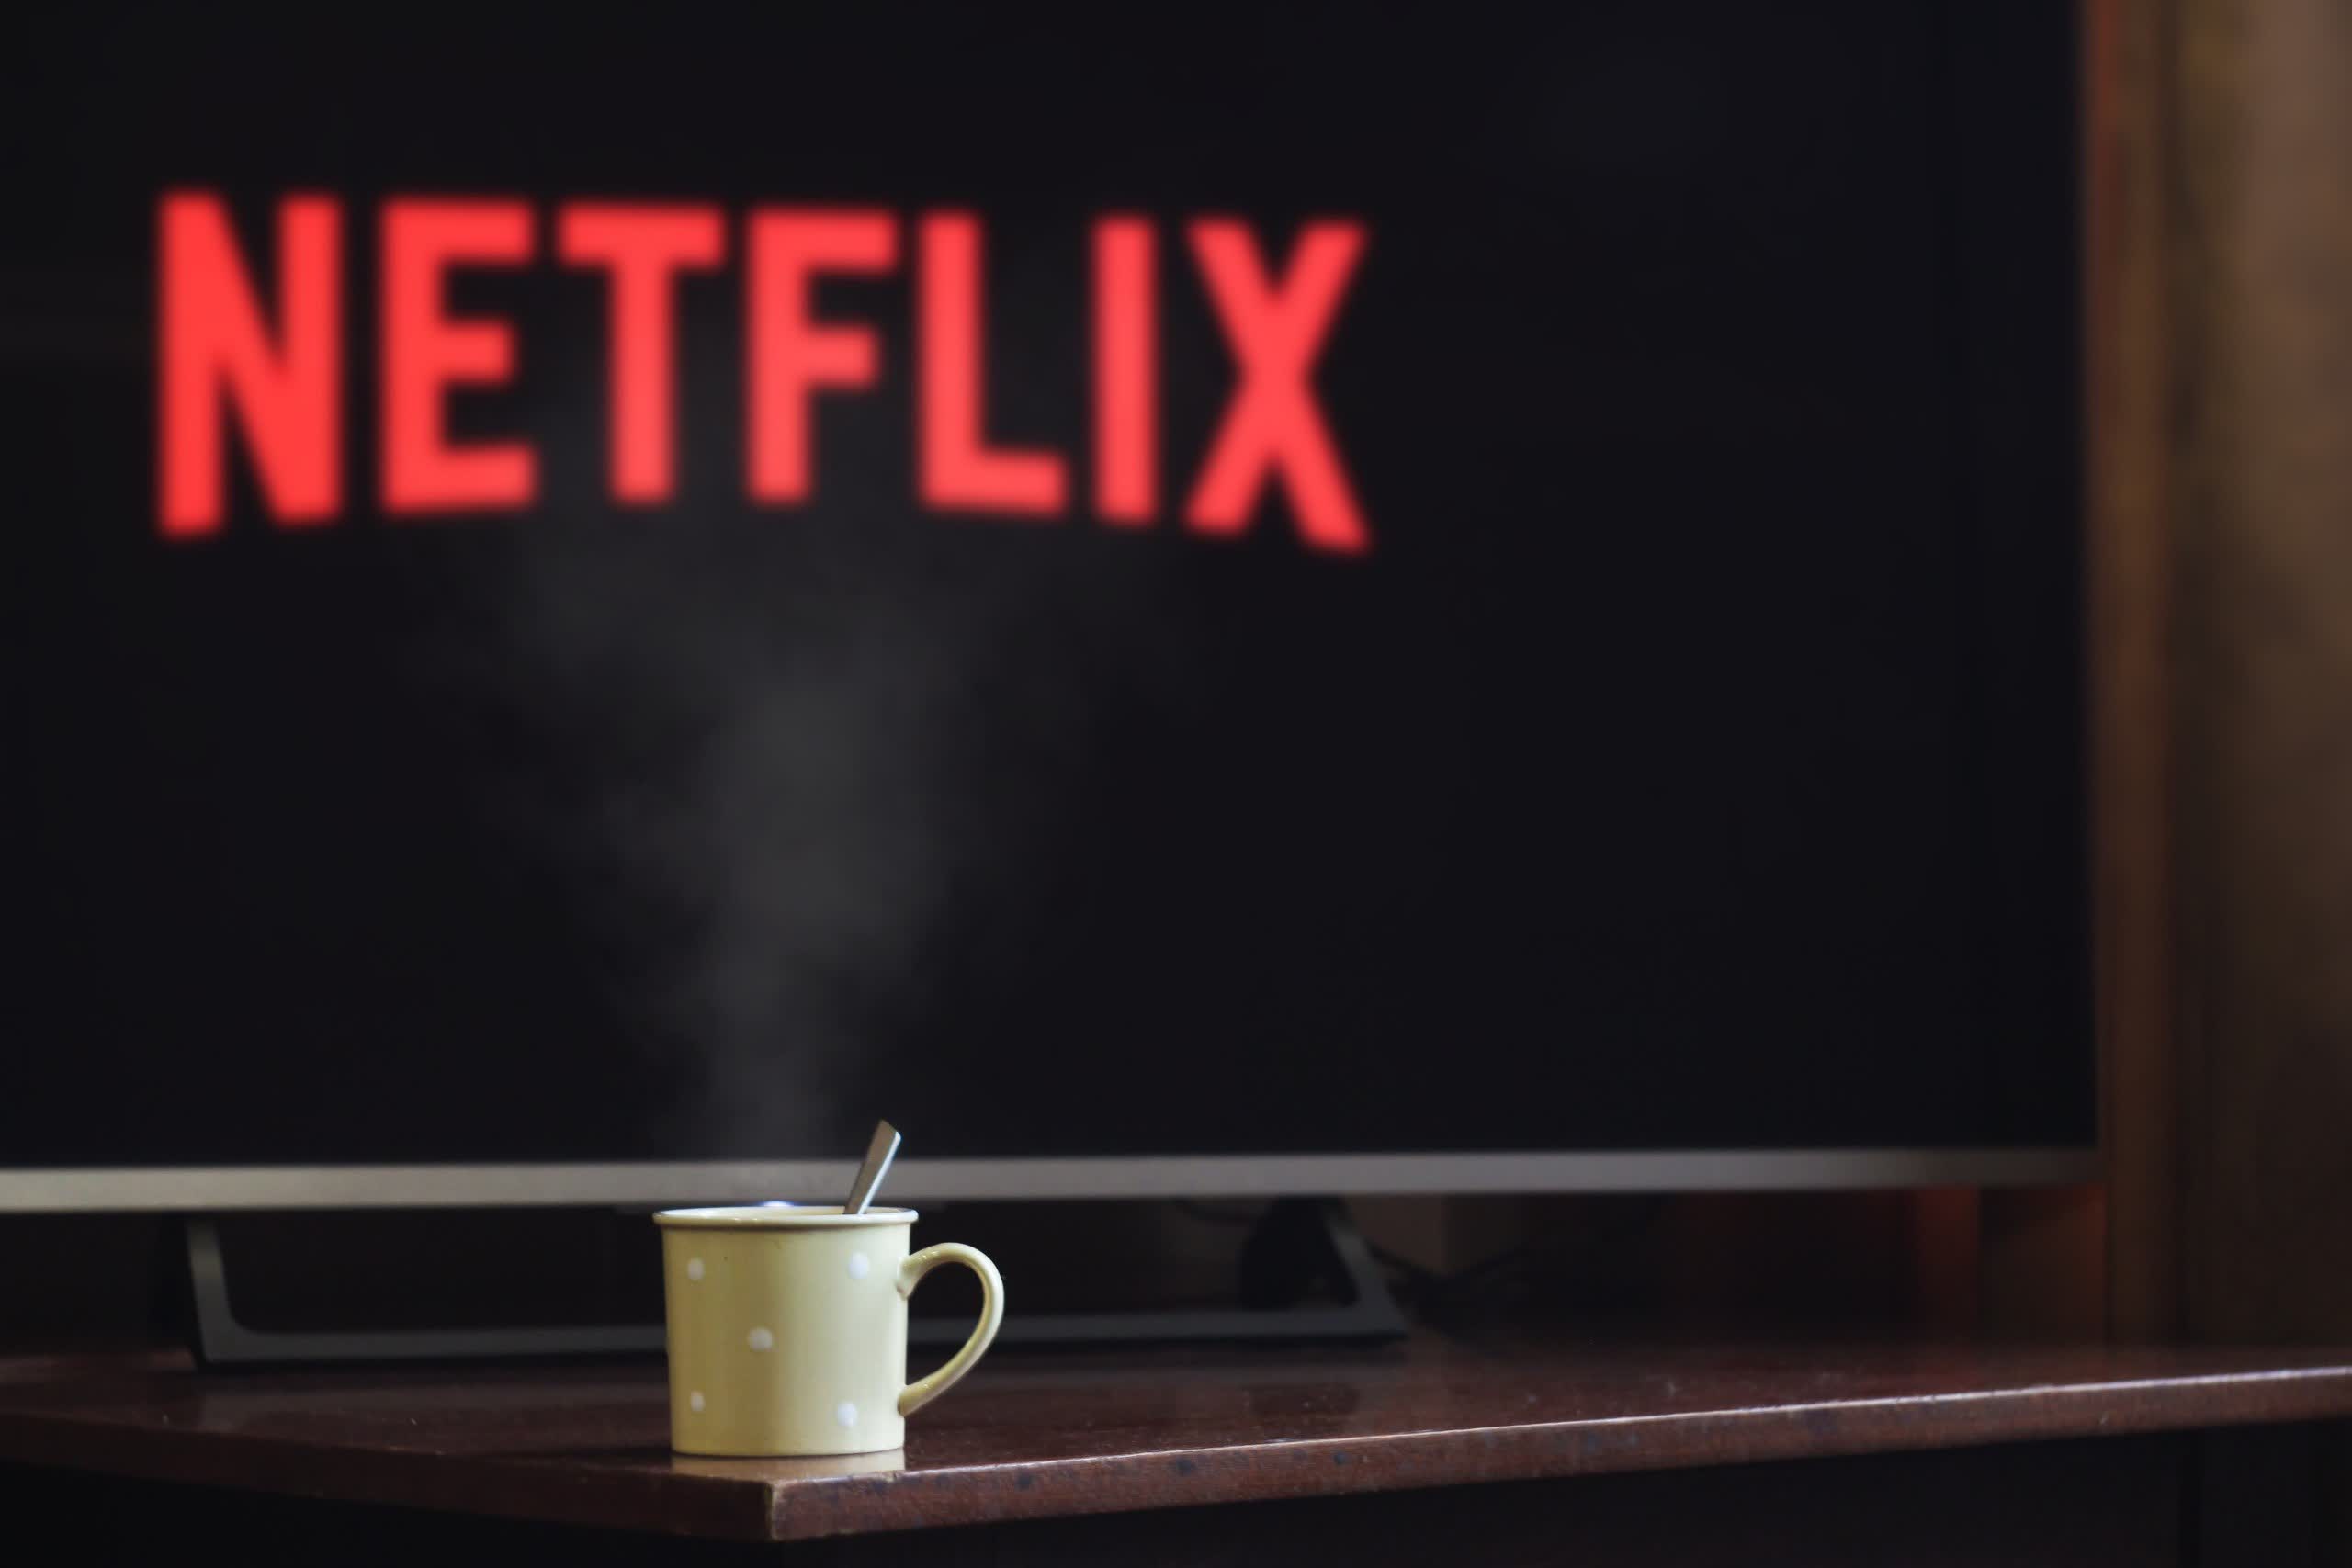 Netflix loses subscribers for the first time in a decade, blames account sharers